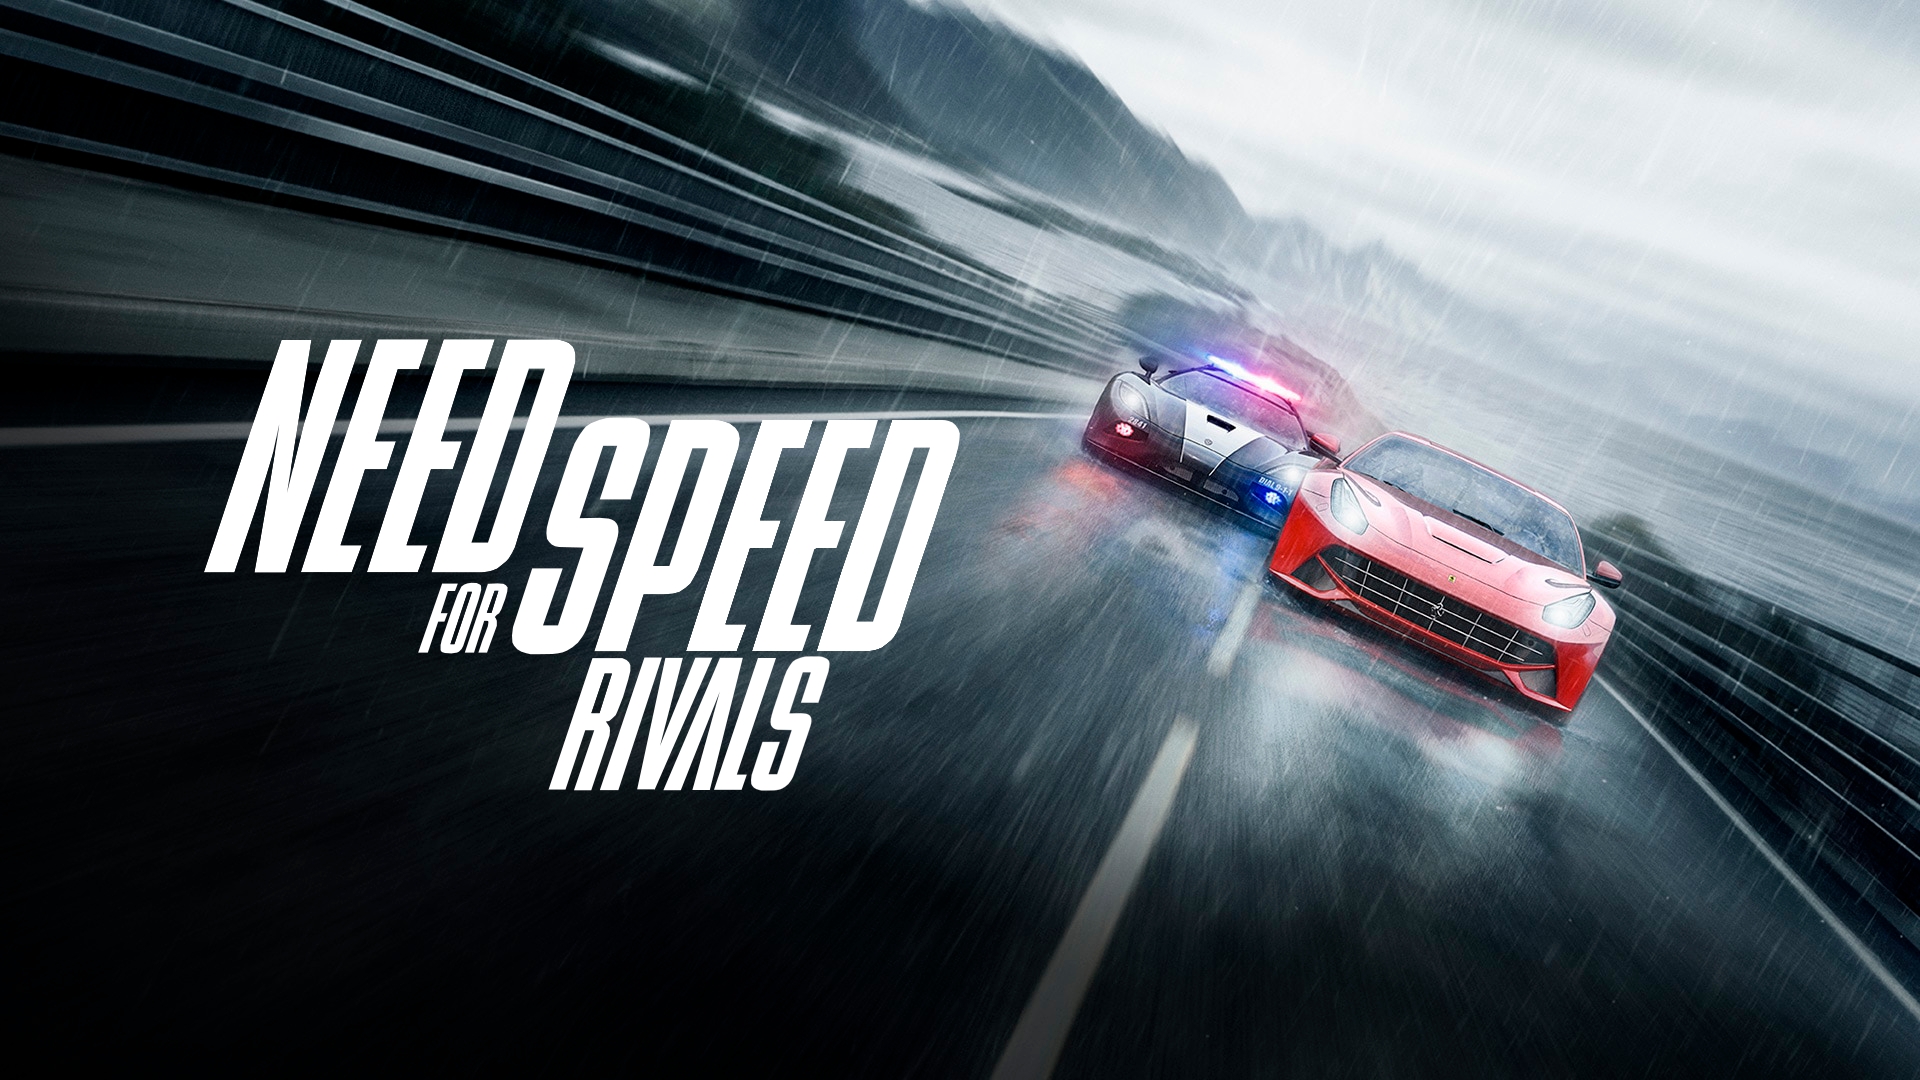  Need for Speed Rivals - PC : Video Games